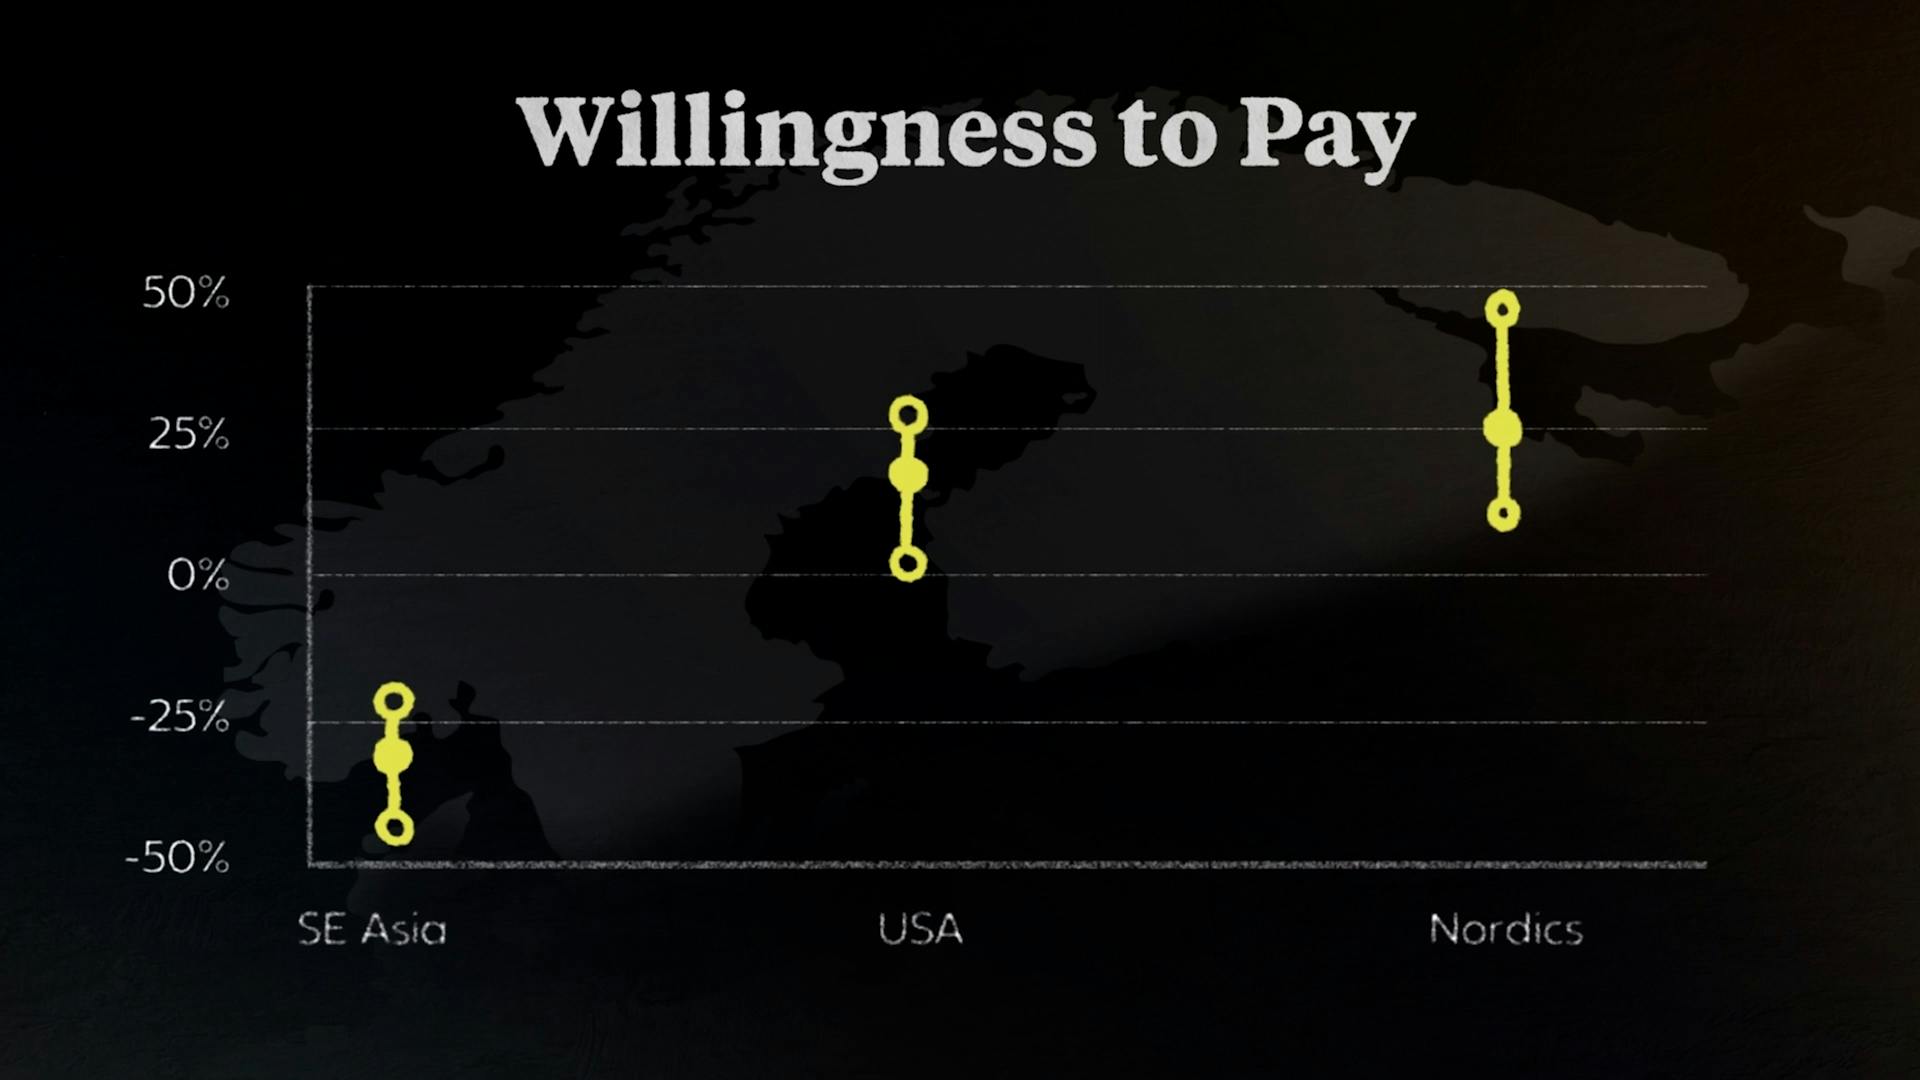 Willingness to Pay by region